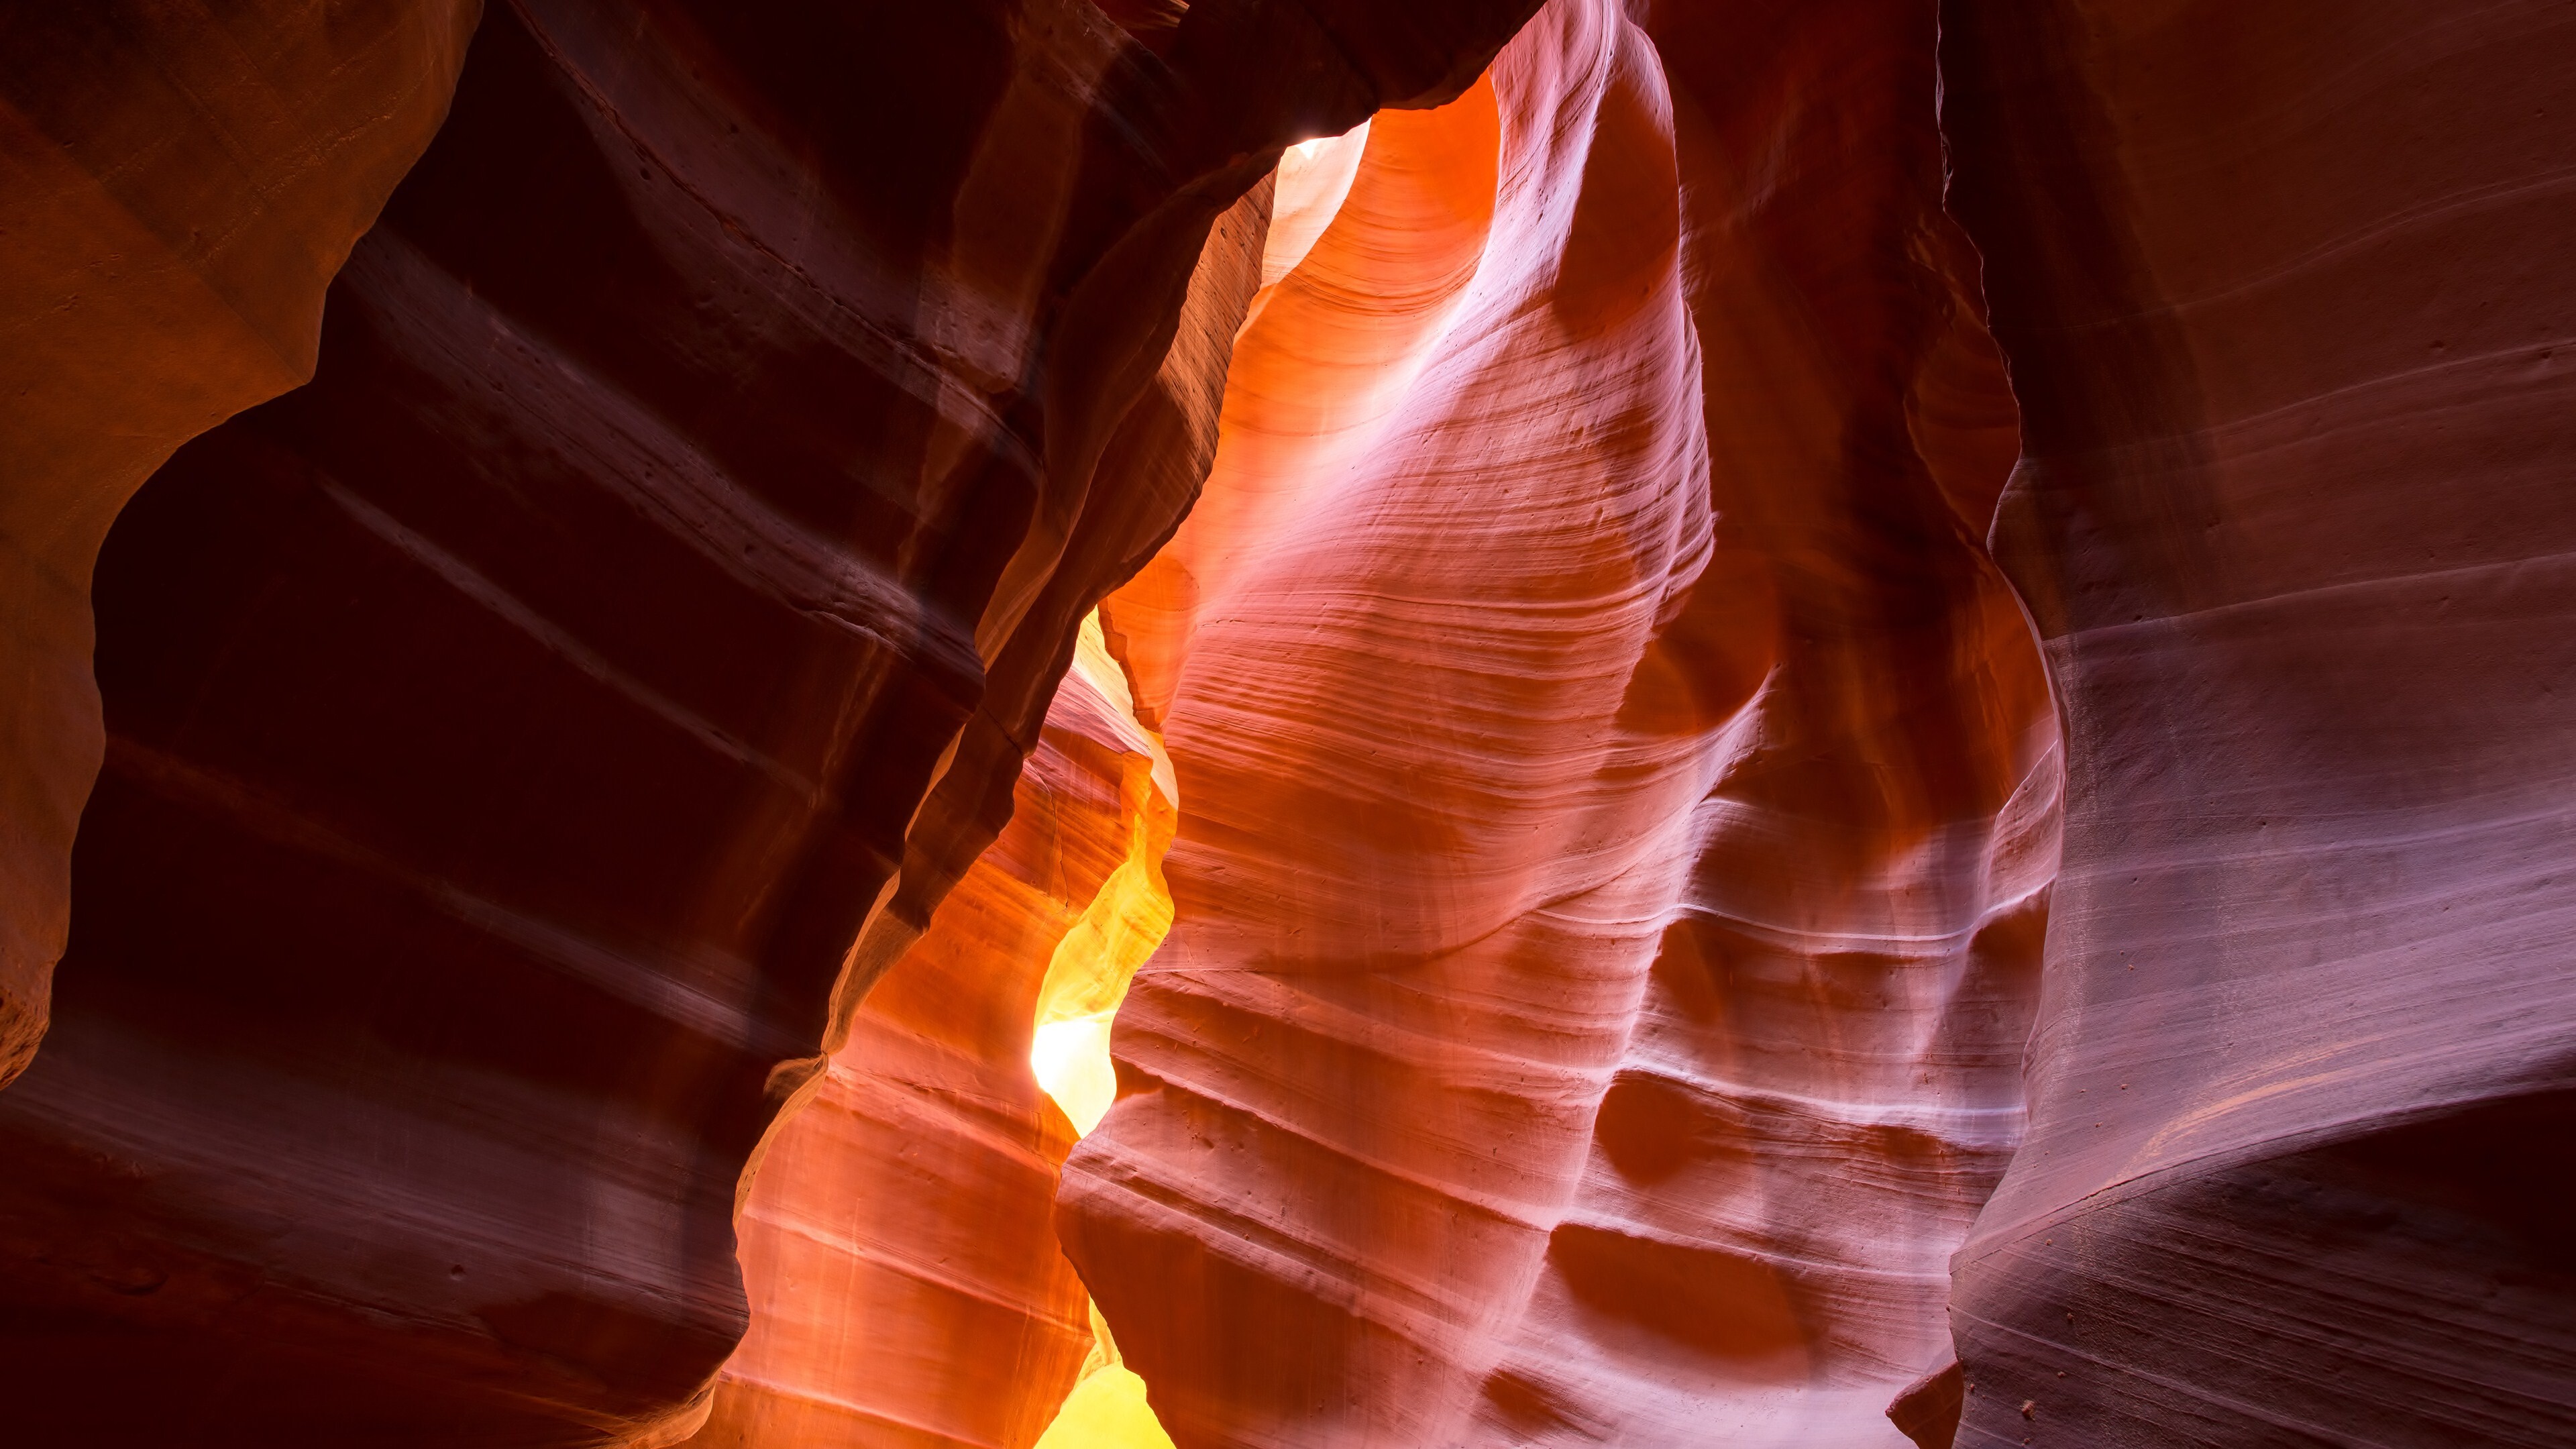 Geology: Slot canyon, A long, narrow channel or drainageway with sheer rock walls. 3840x2160 4K Background.